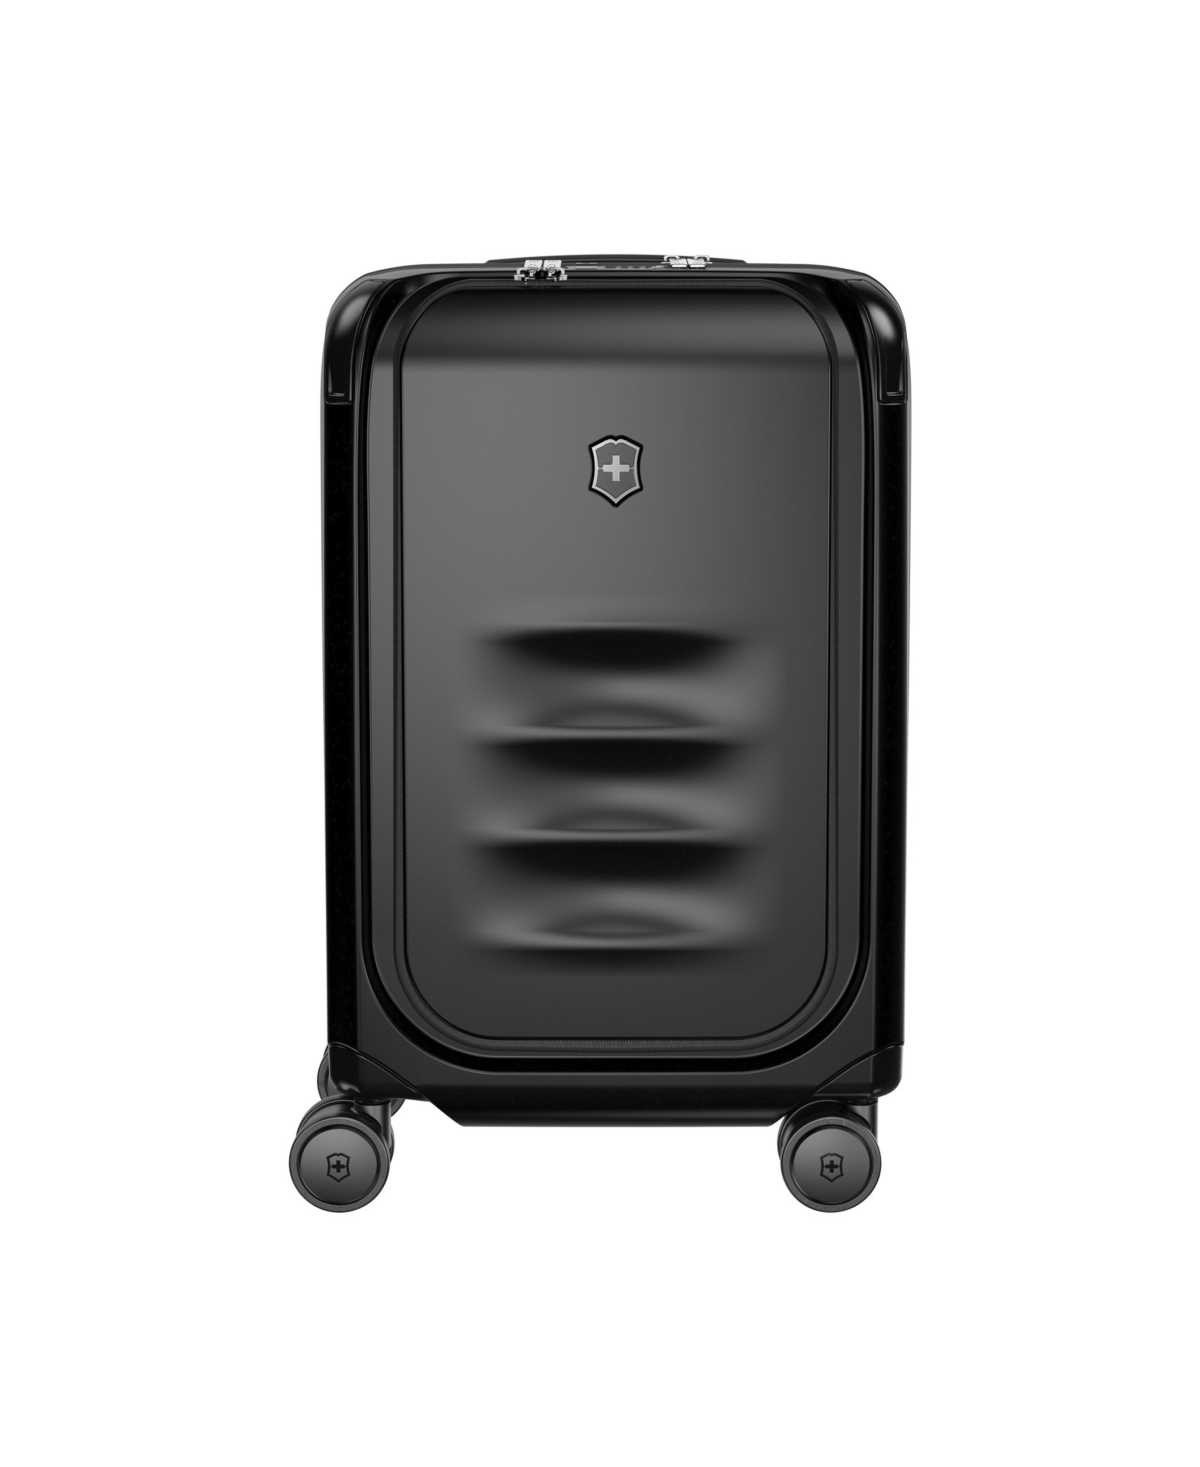 Victorinox Spectra 3.0 Frequent Flyer 21" Carry-On Hardside Suitcase - Black